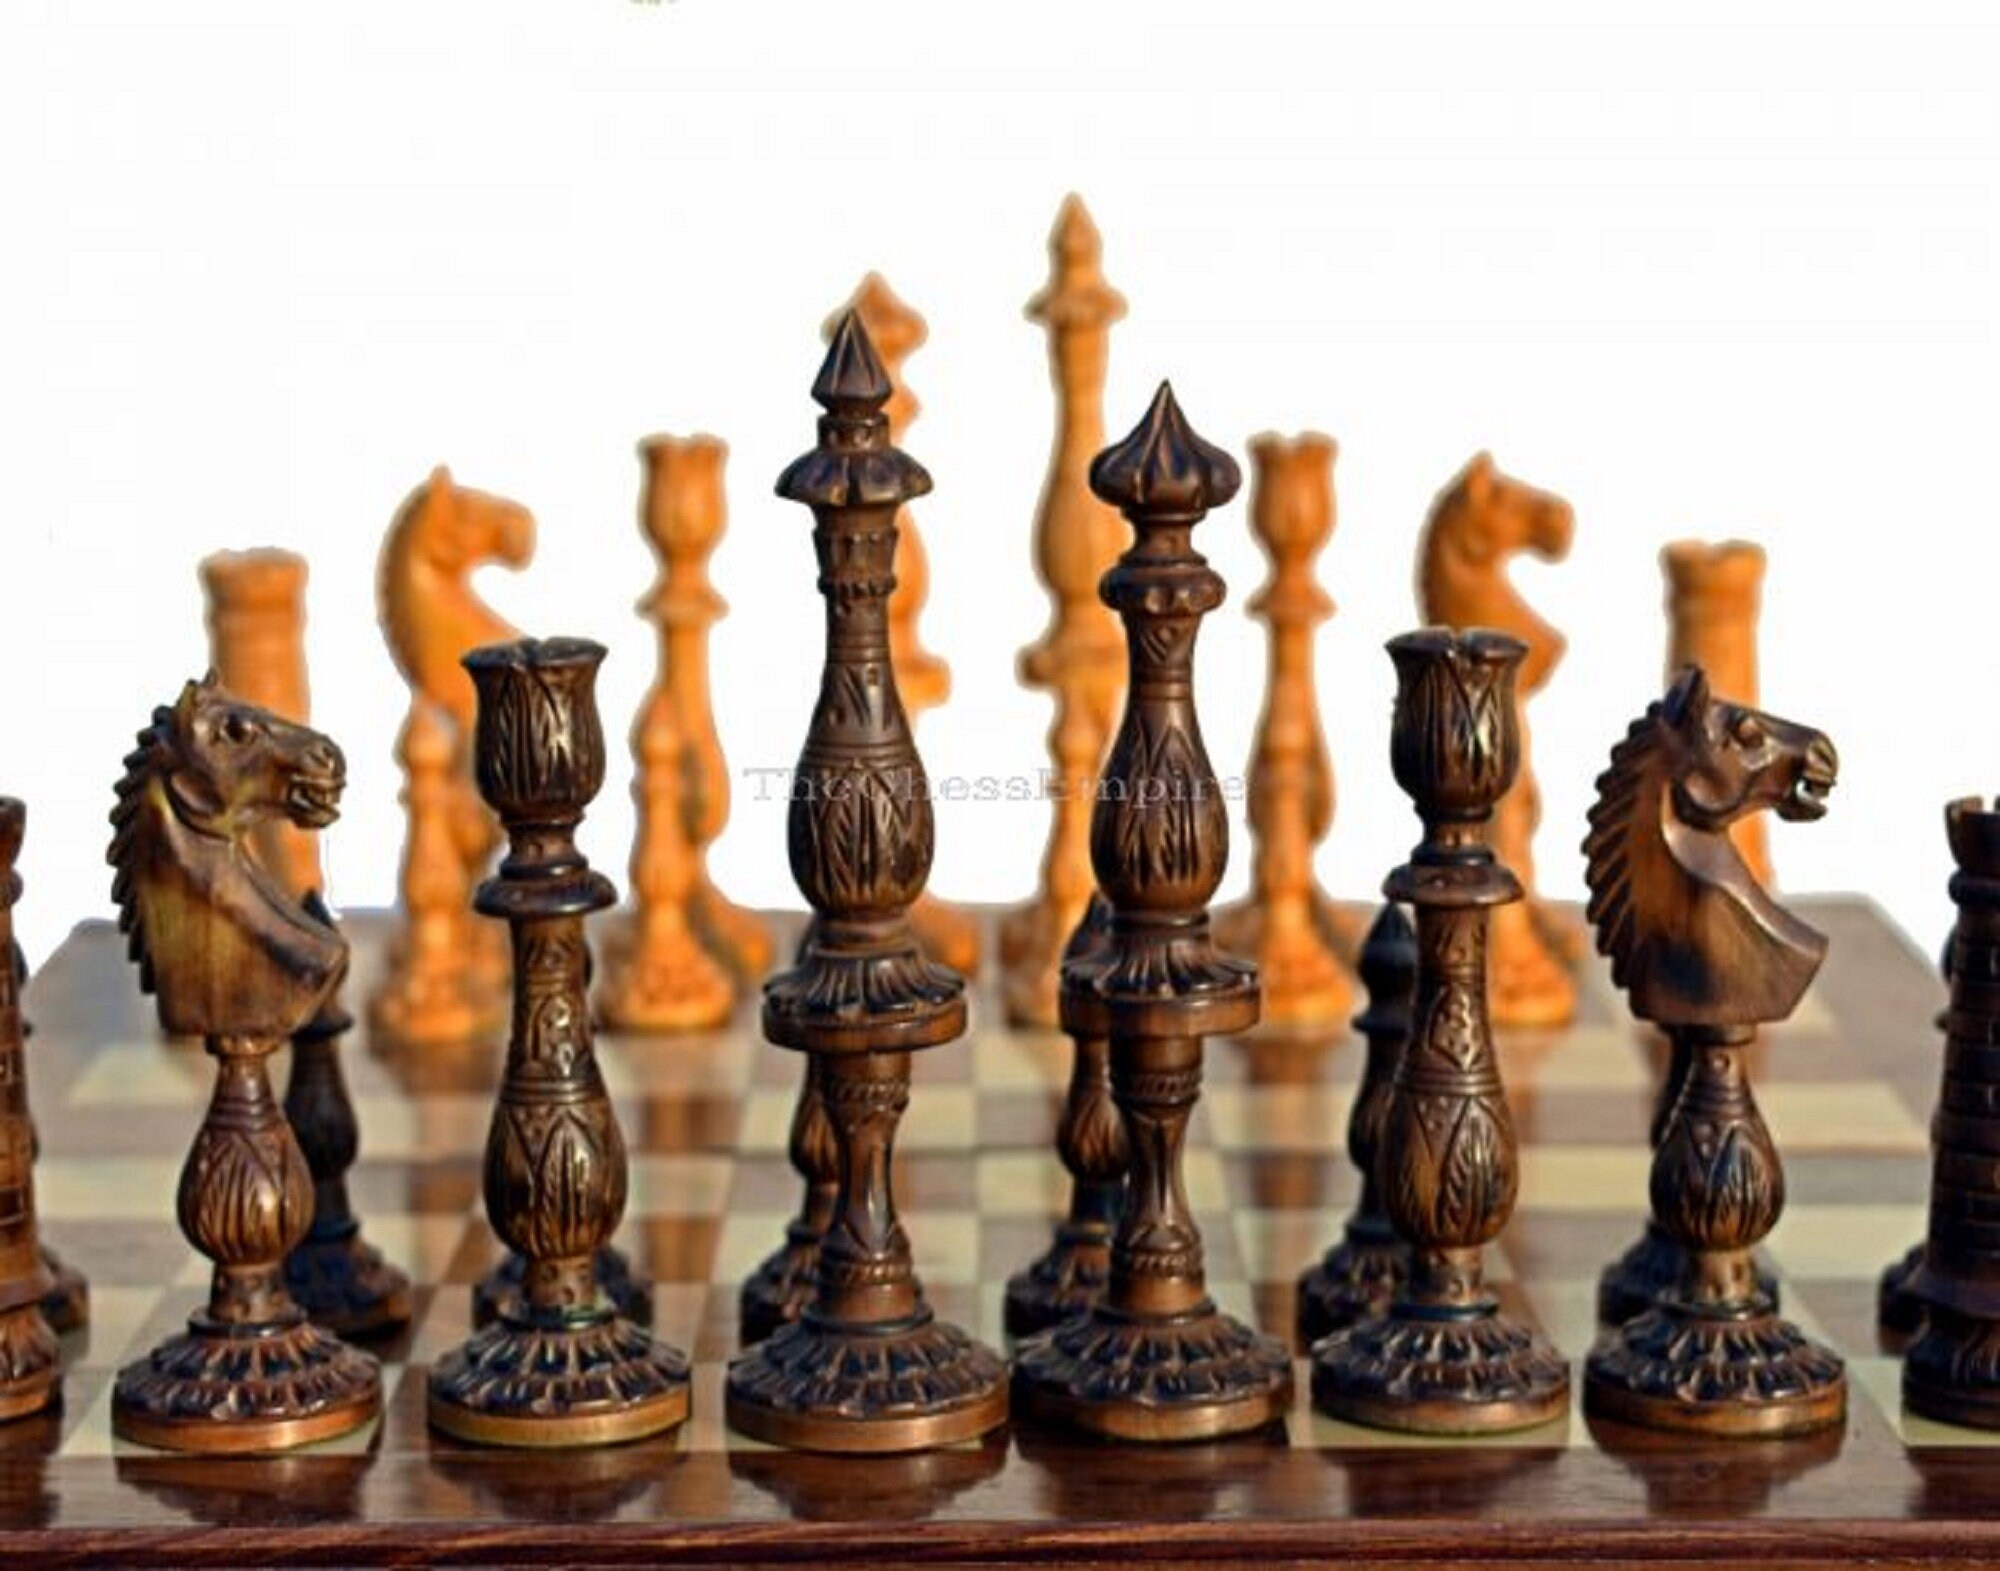 Bold Luxury Chess Set with hand-carved wooden pieces and supreme board –